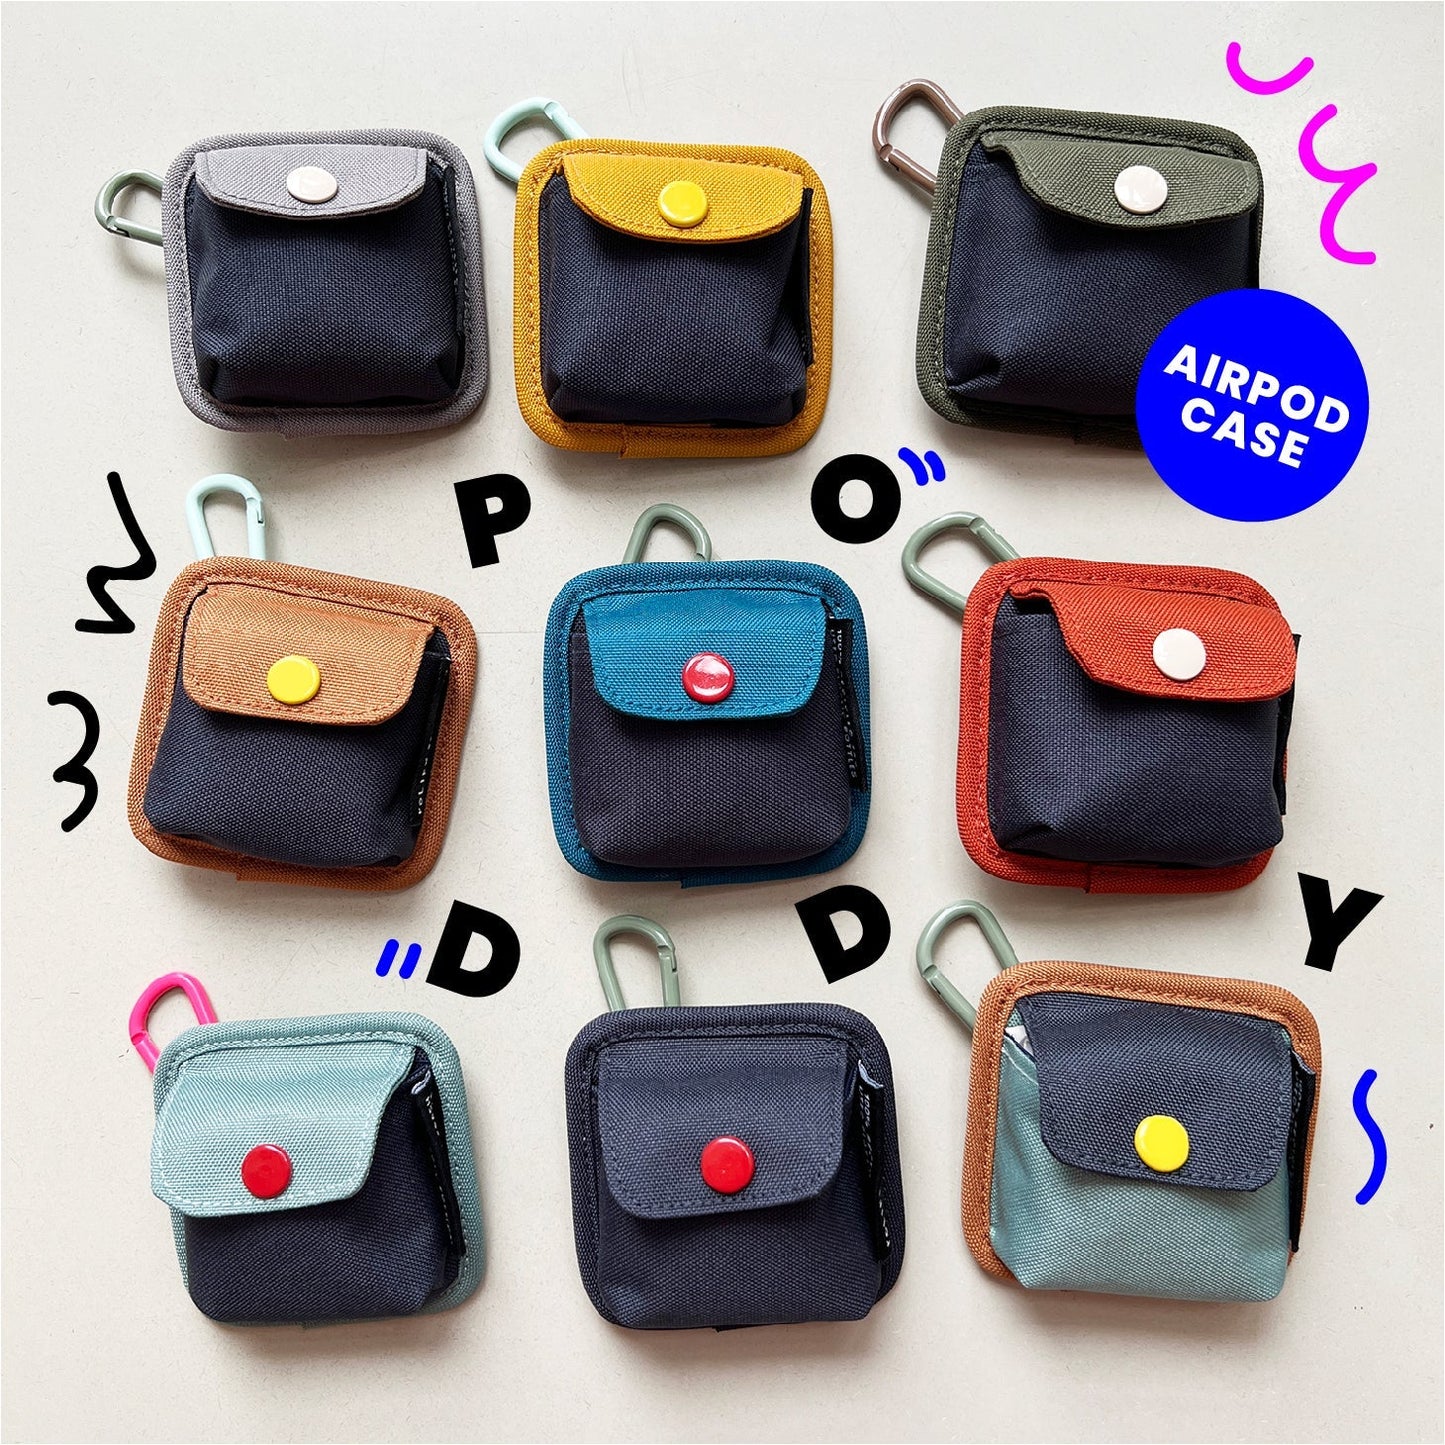 Poddy relife stone airpod pouch